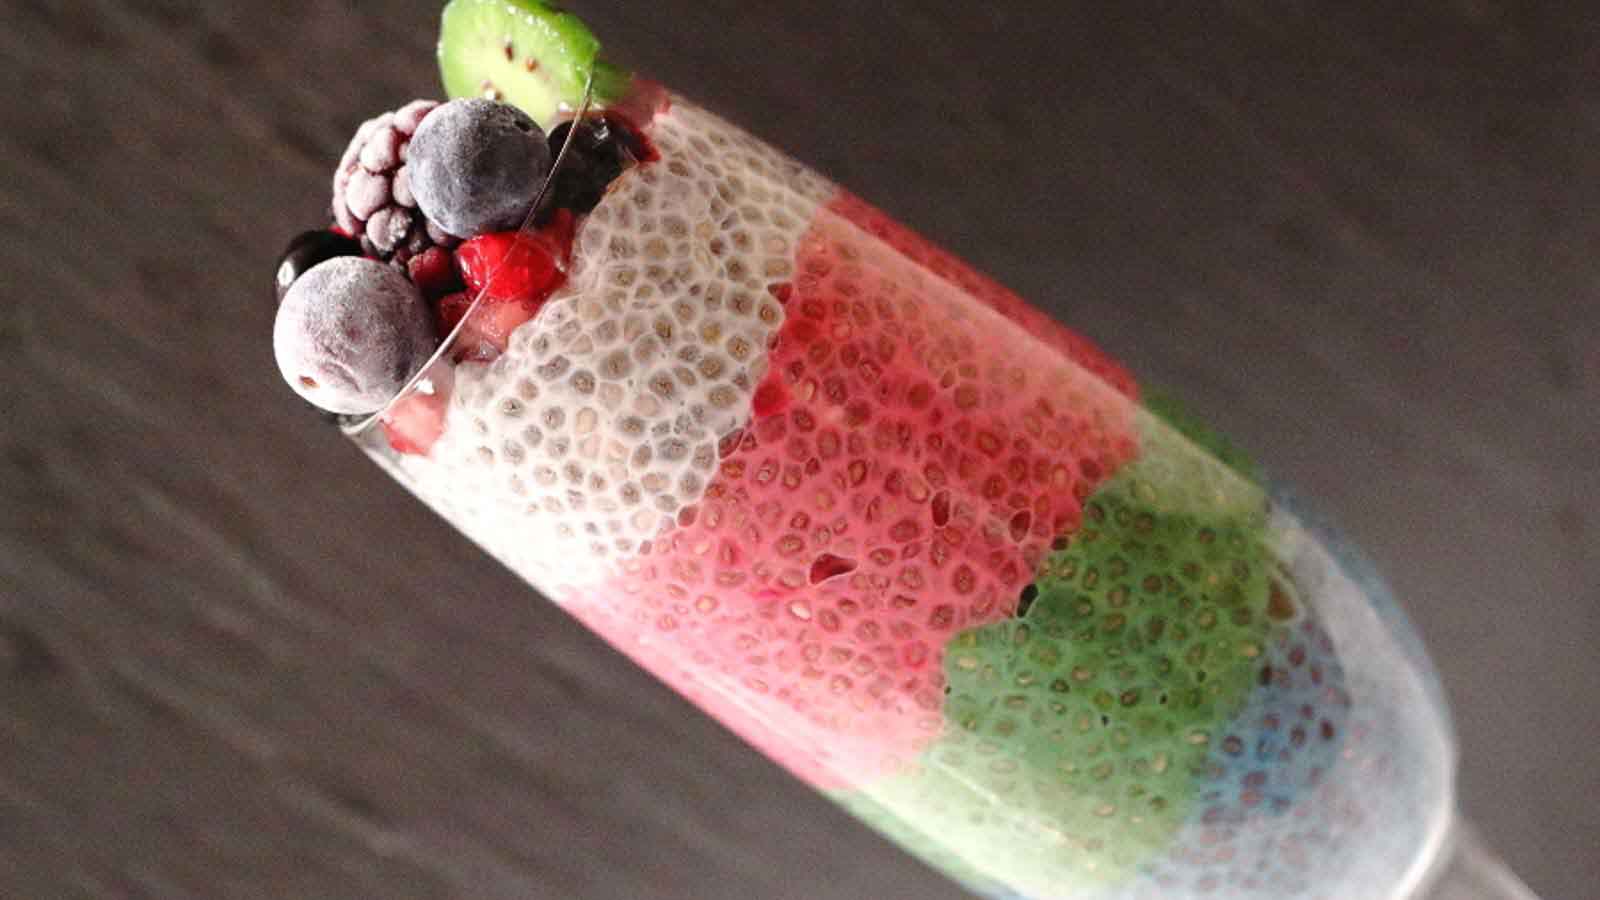 A glass filled with colorful chia pudding.